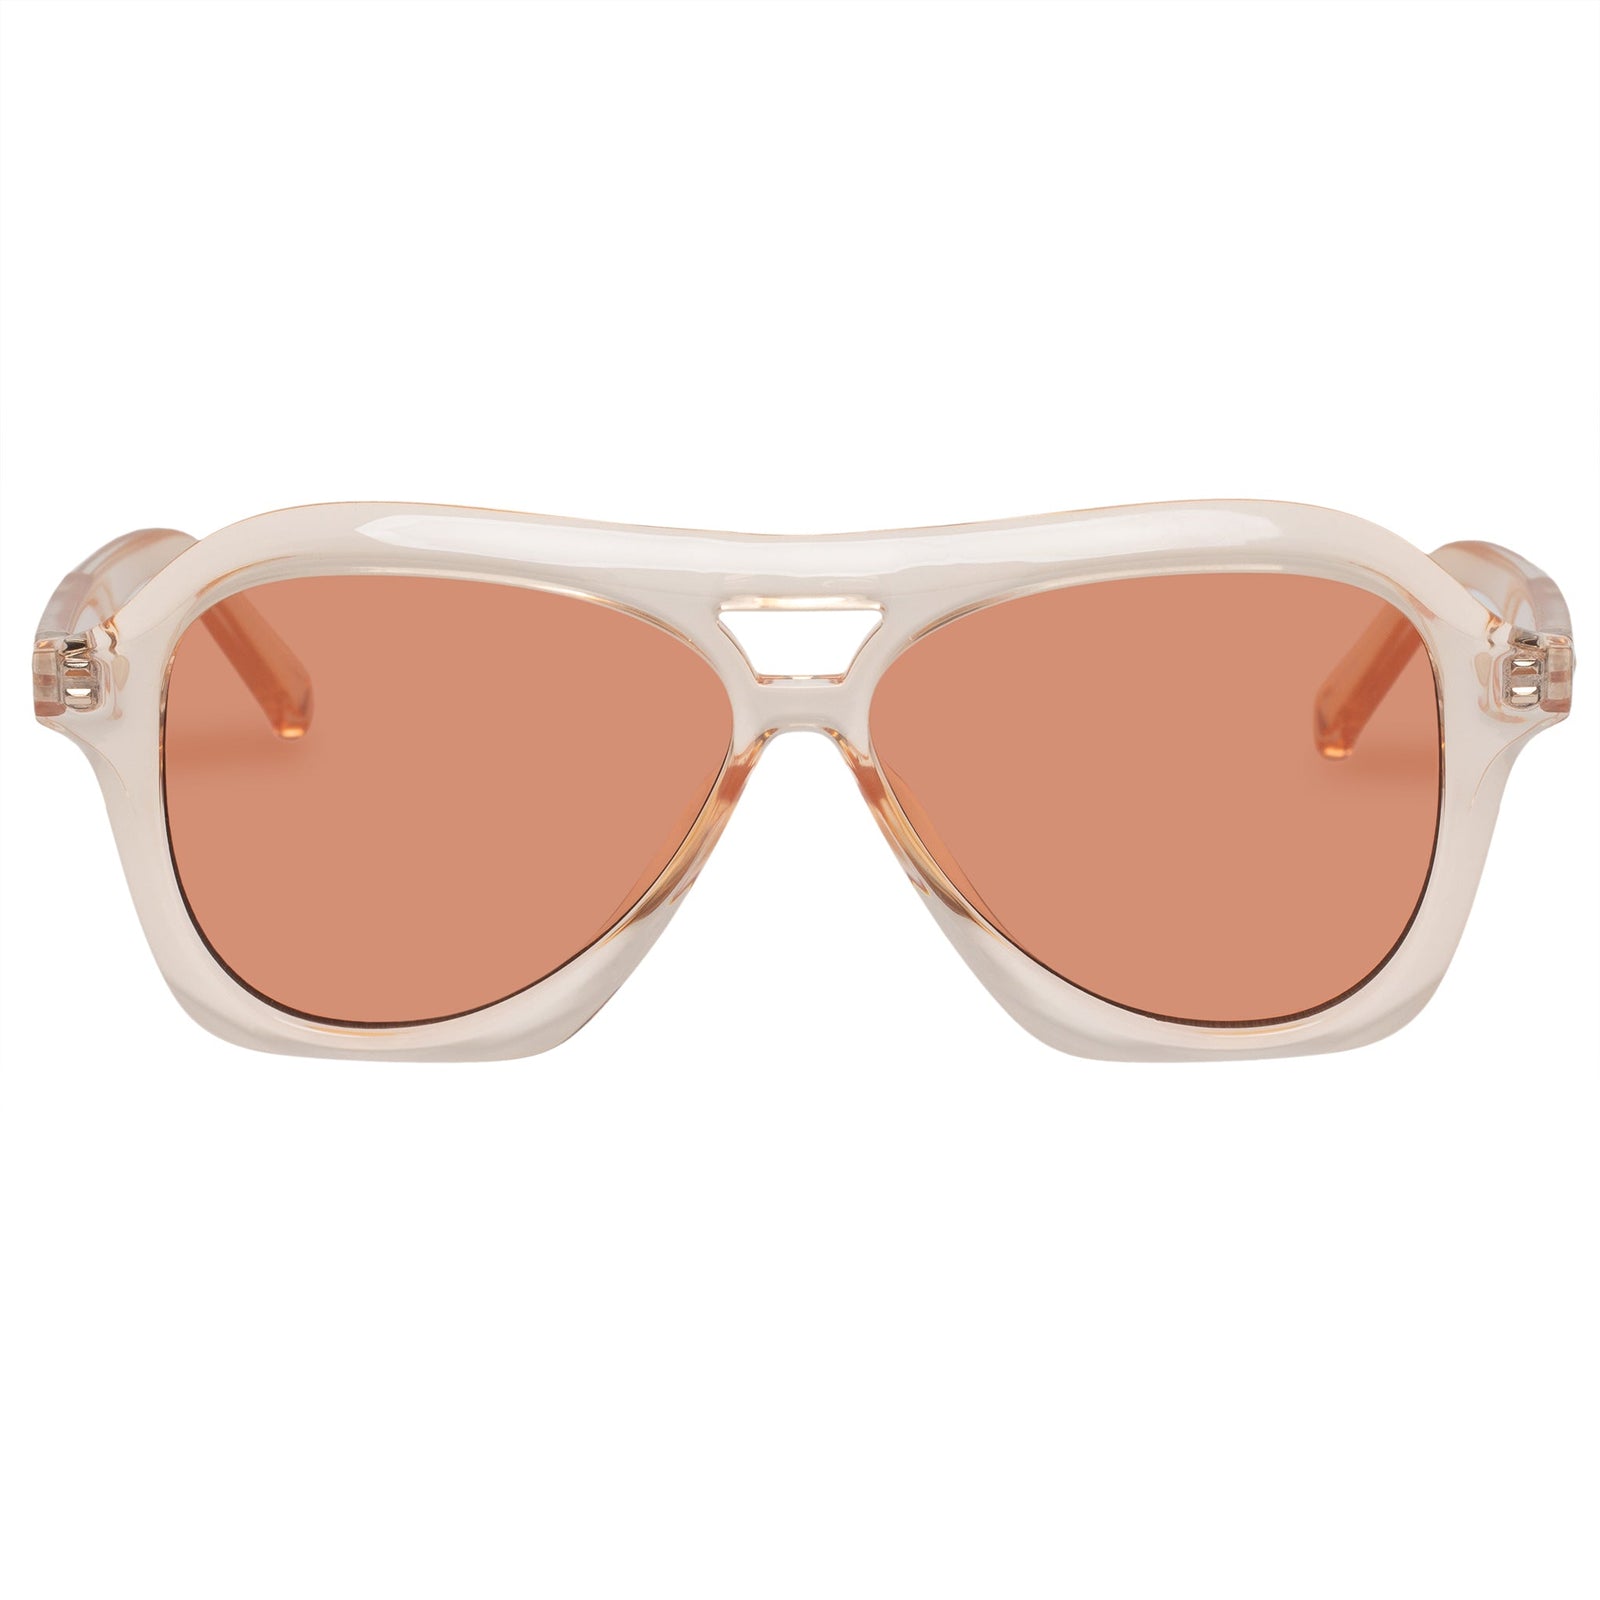 Le Specs Drizzle Limited Edition Sunglasses in Nougat